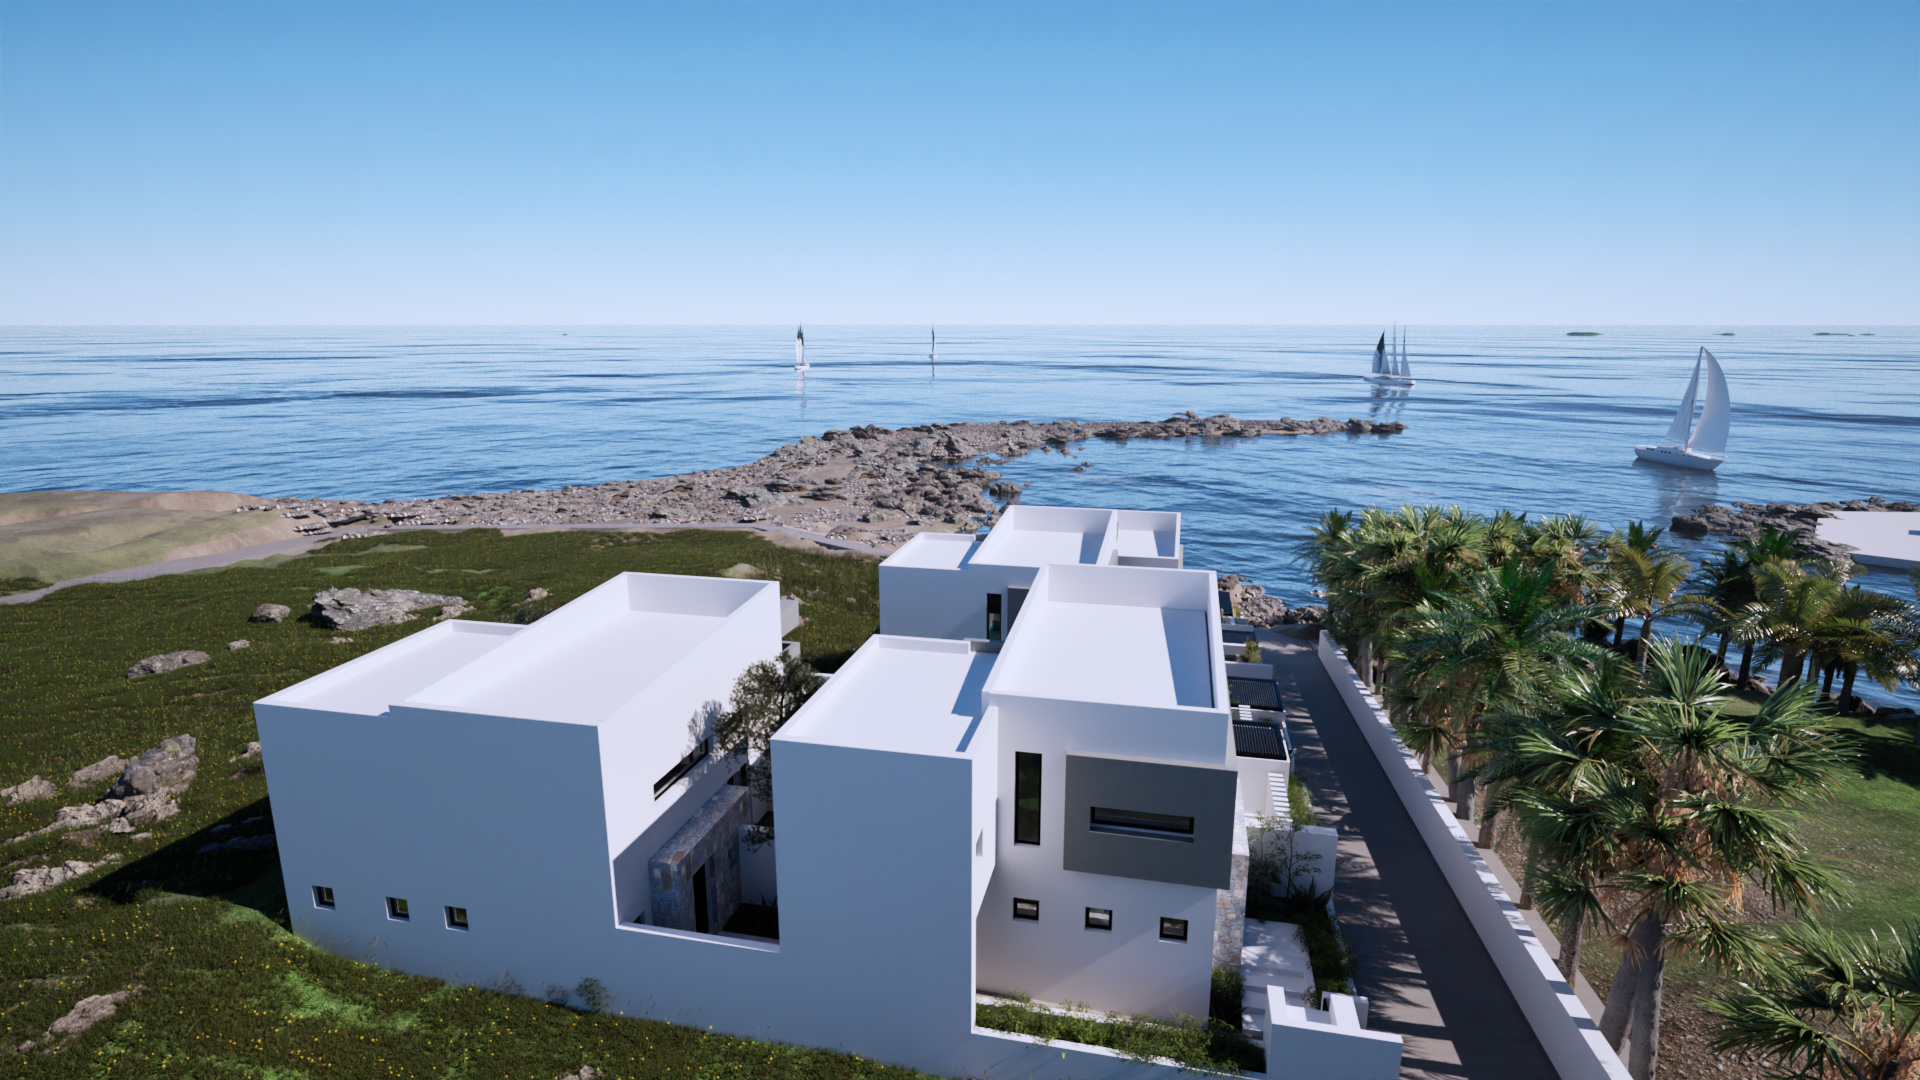 Excellent seaside complex of 4 houses on the sea.